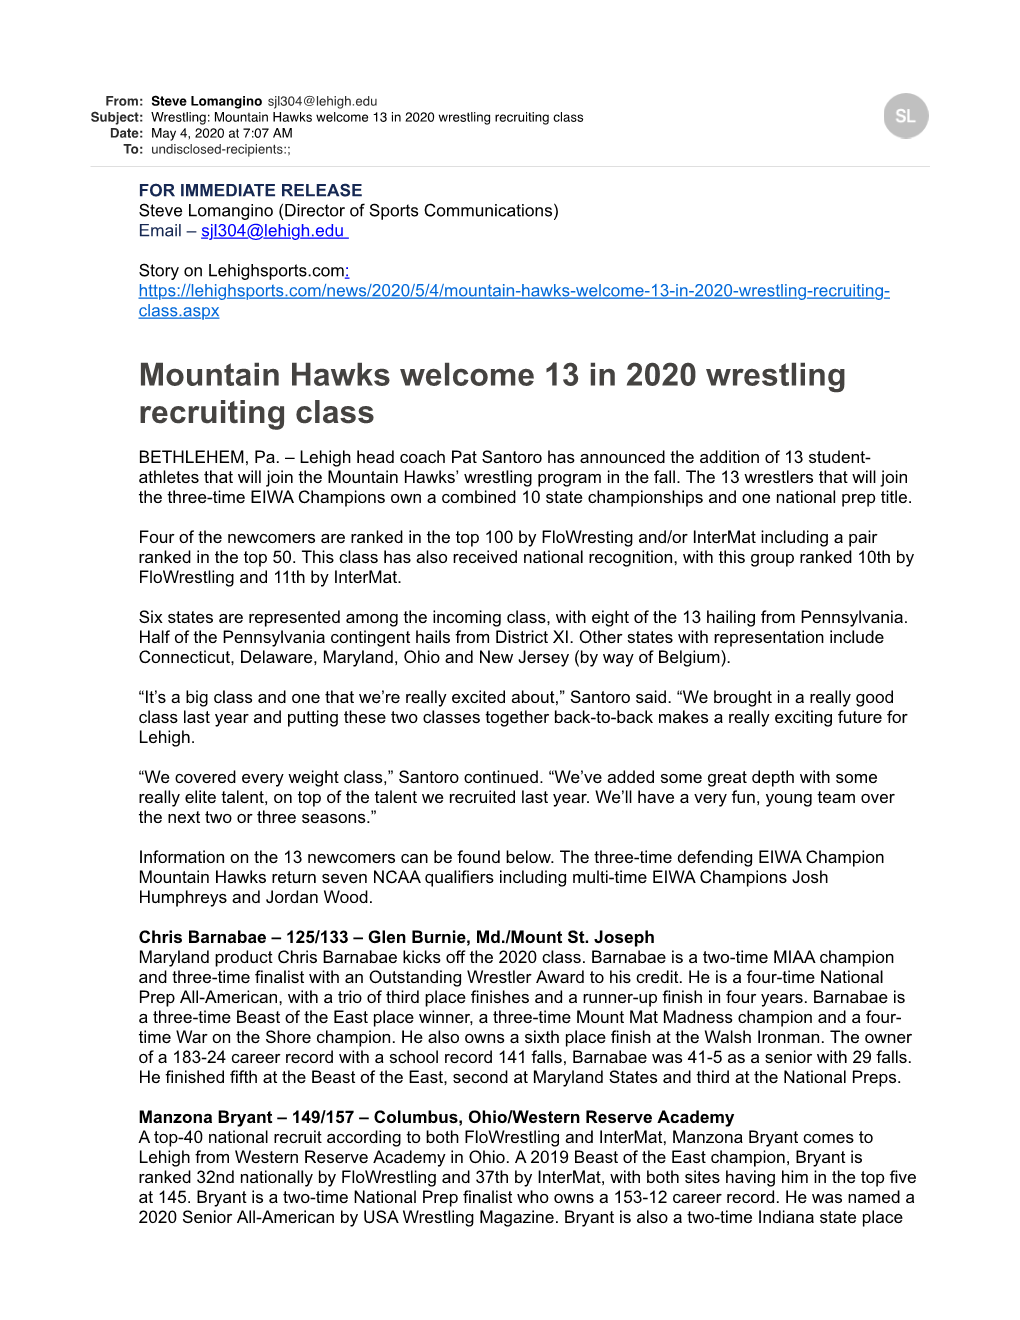 Wrestling Mountain Hawks Welcome 13 in 2020 Wrestling Recruiting Class